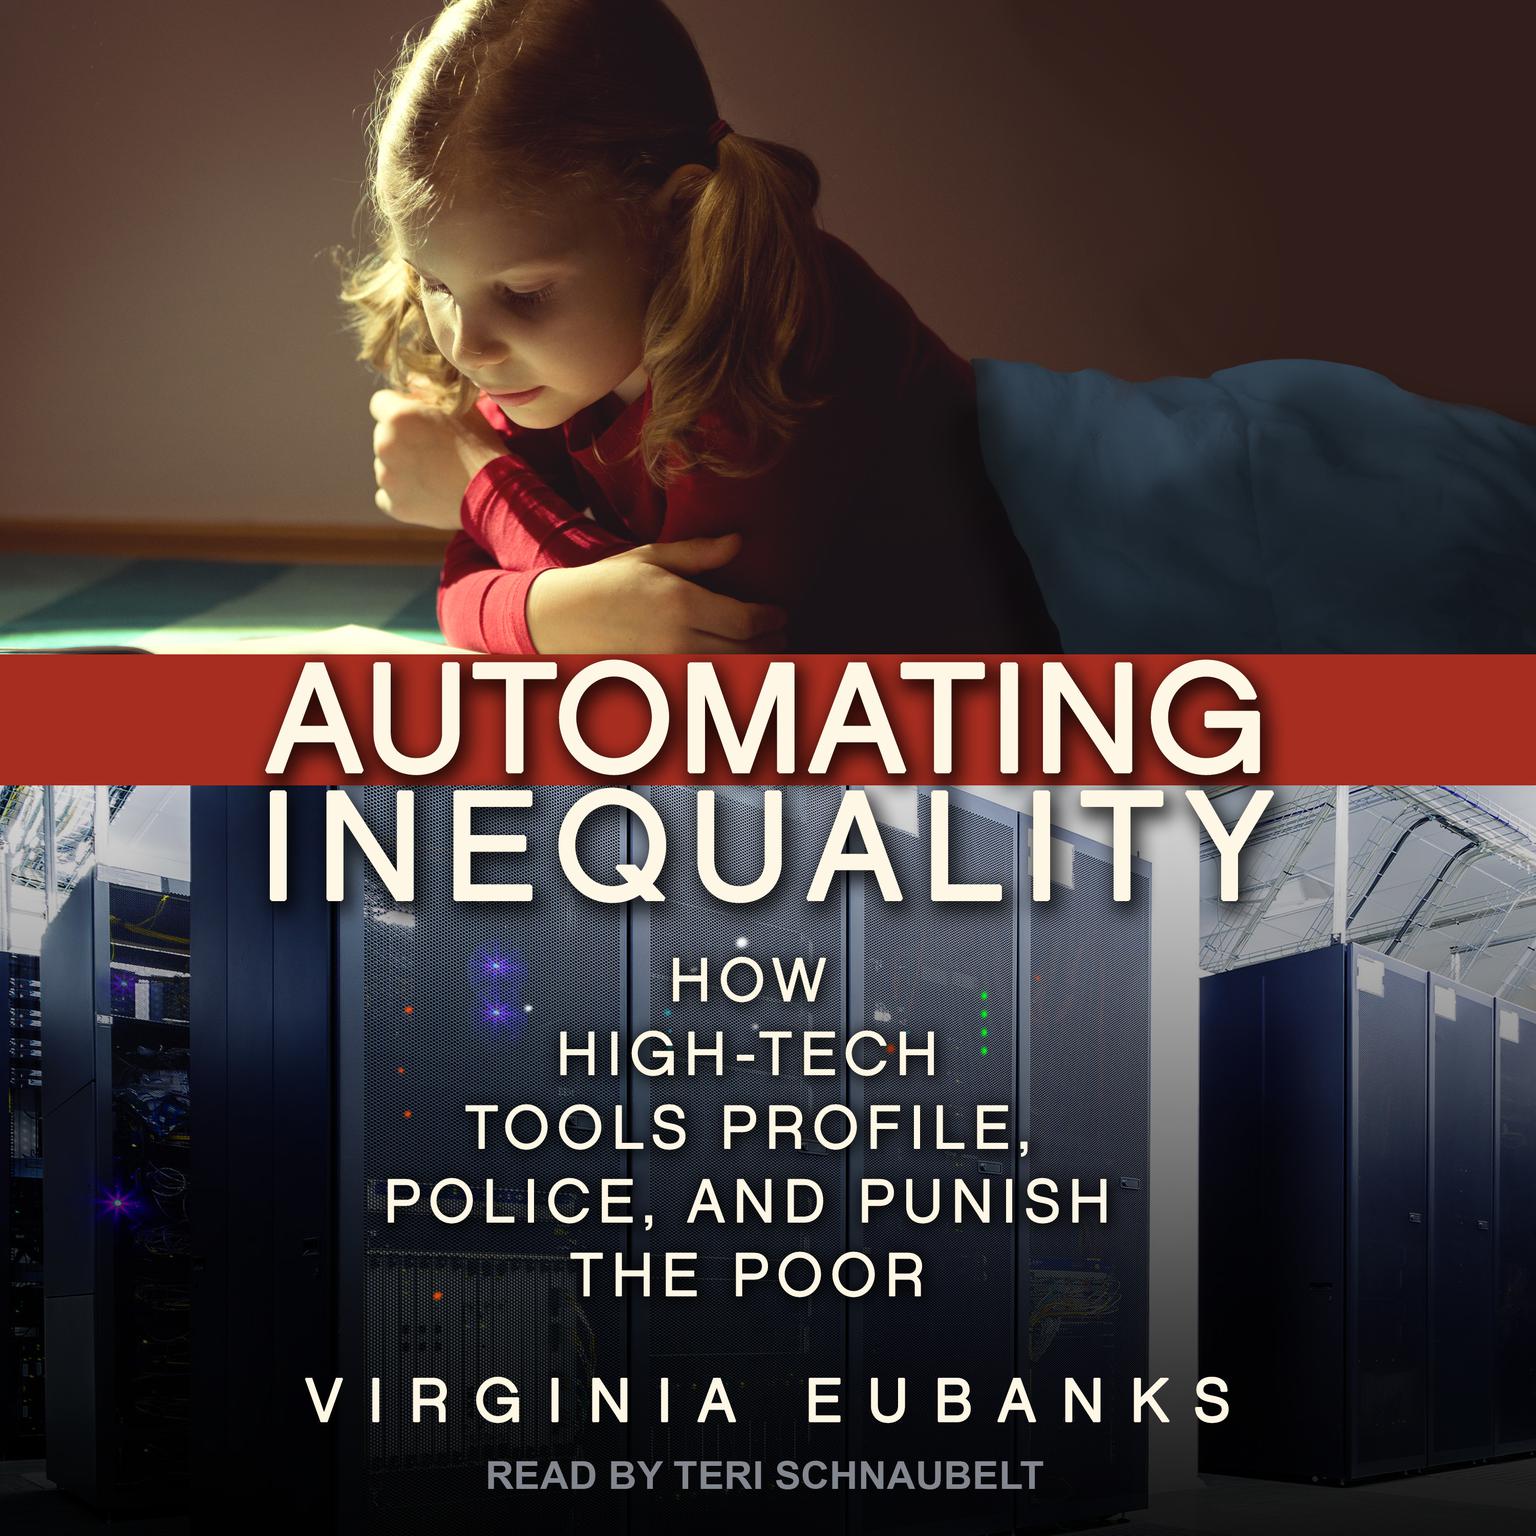 Automating Inequality: How High-Tech Tools Profile, Police, and Punish the Poor Audiobook, by Virginia Eubanks